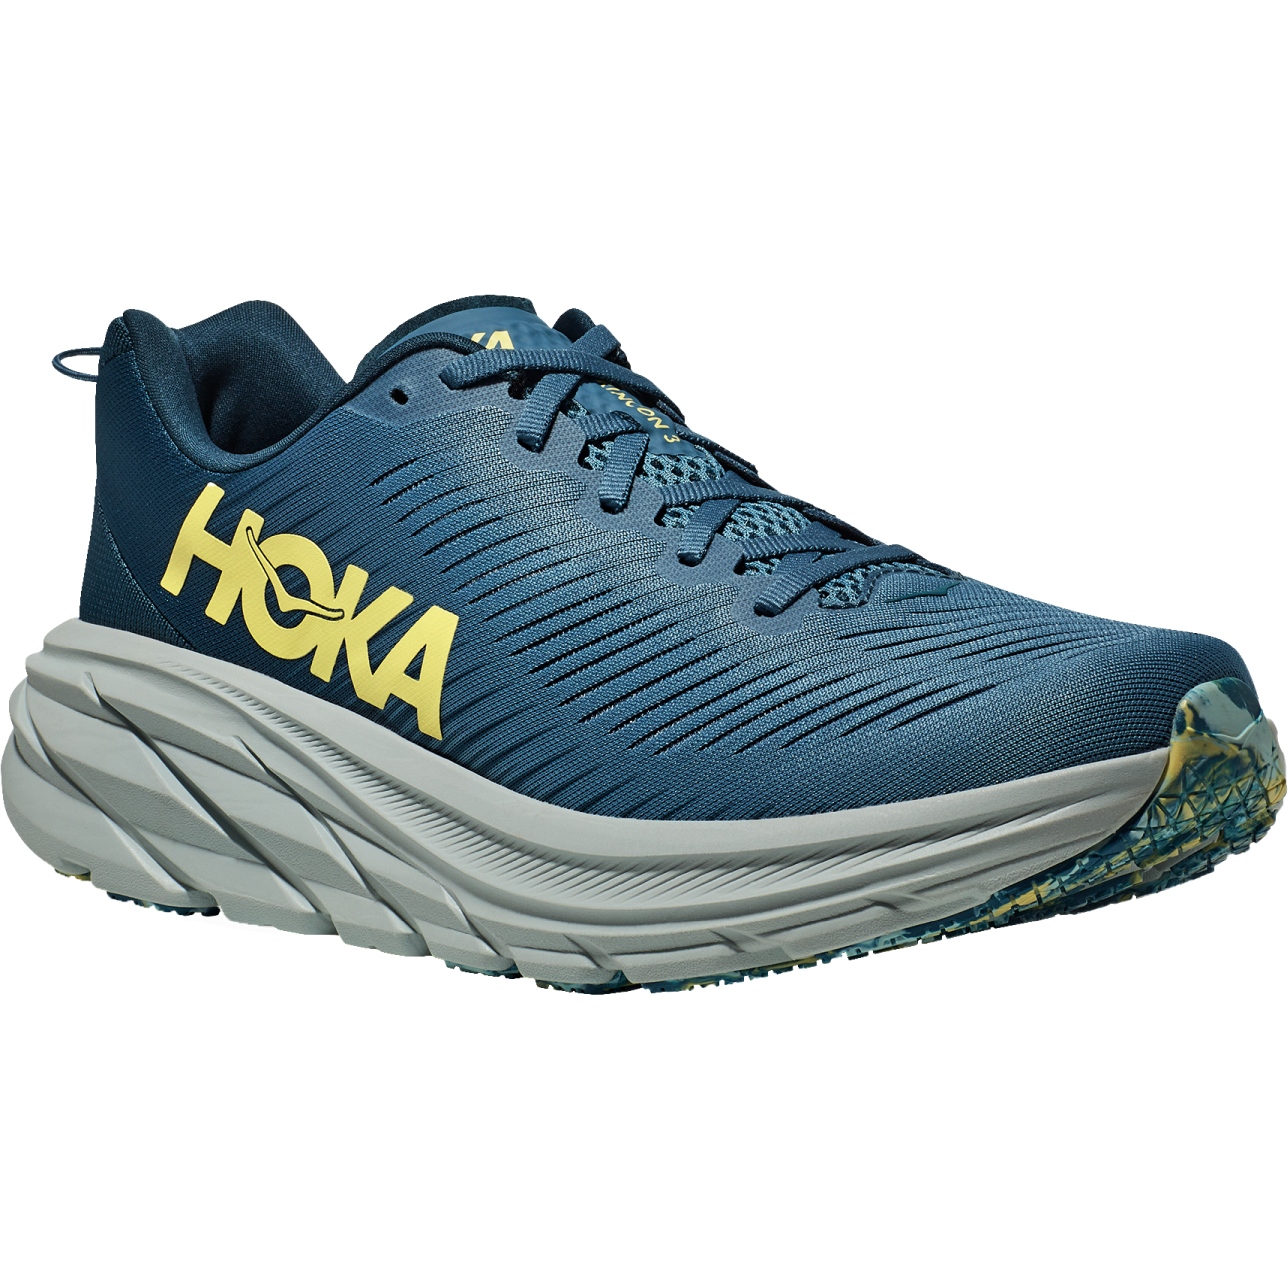 Picture of Hoka Rincon 3 Running Shoes - bluesteel / deep dive